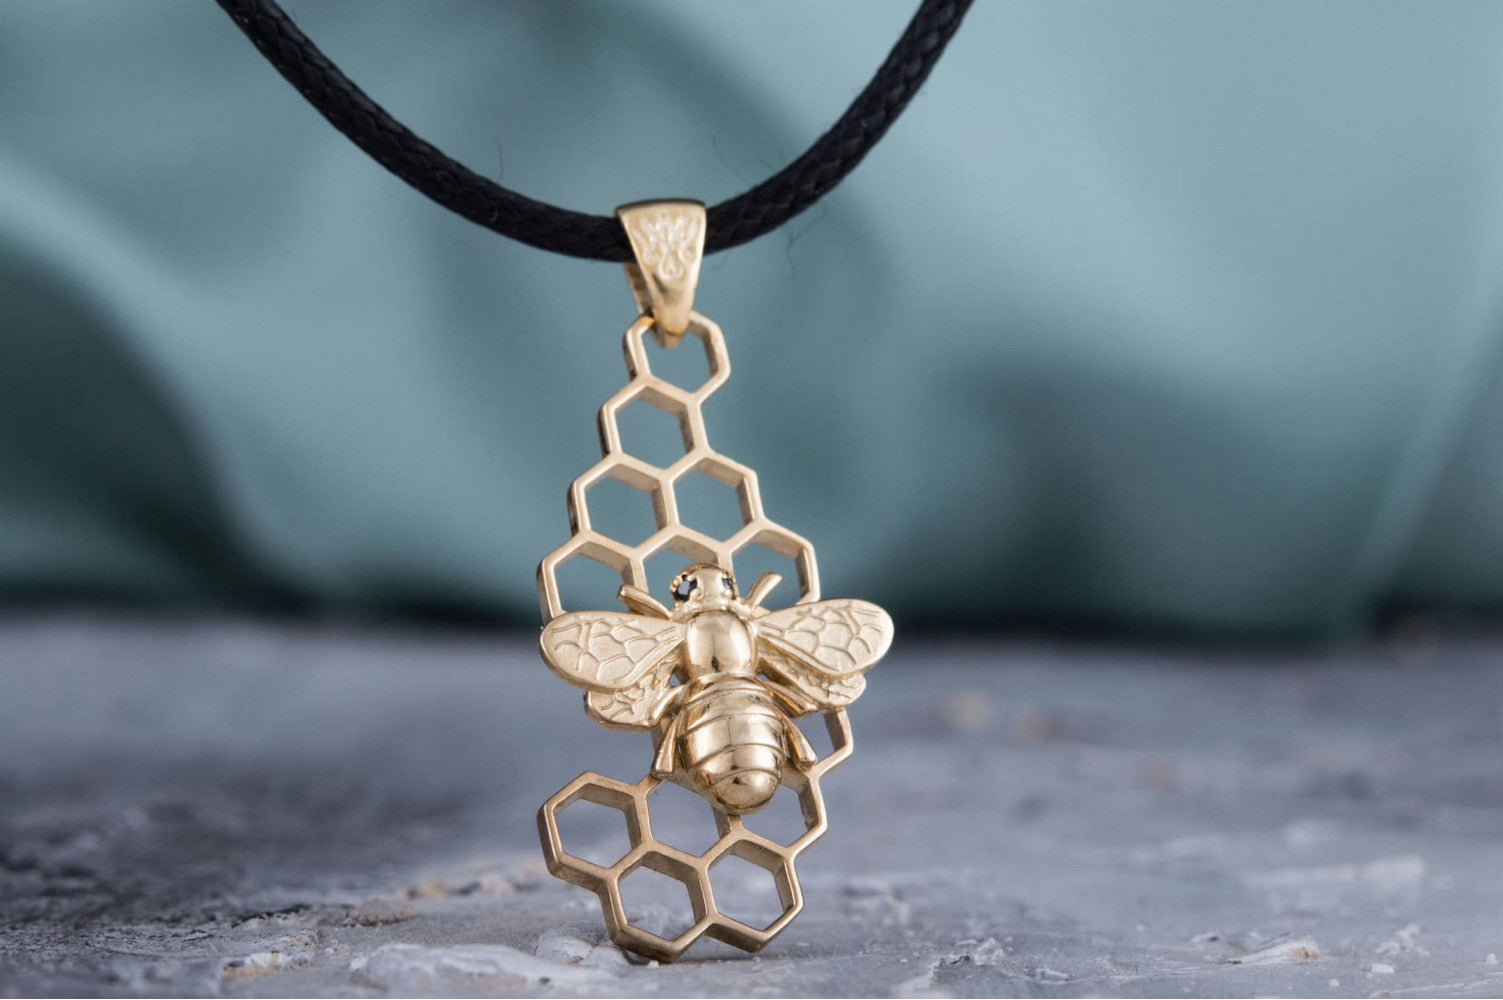 14K Gold Unique Pendant with Bee Symbol Handcrafted Jewelry